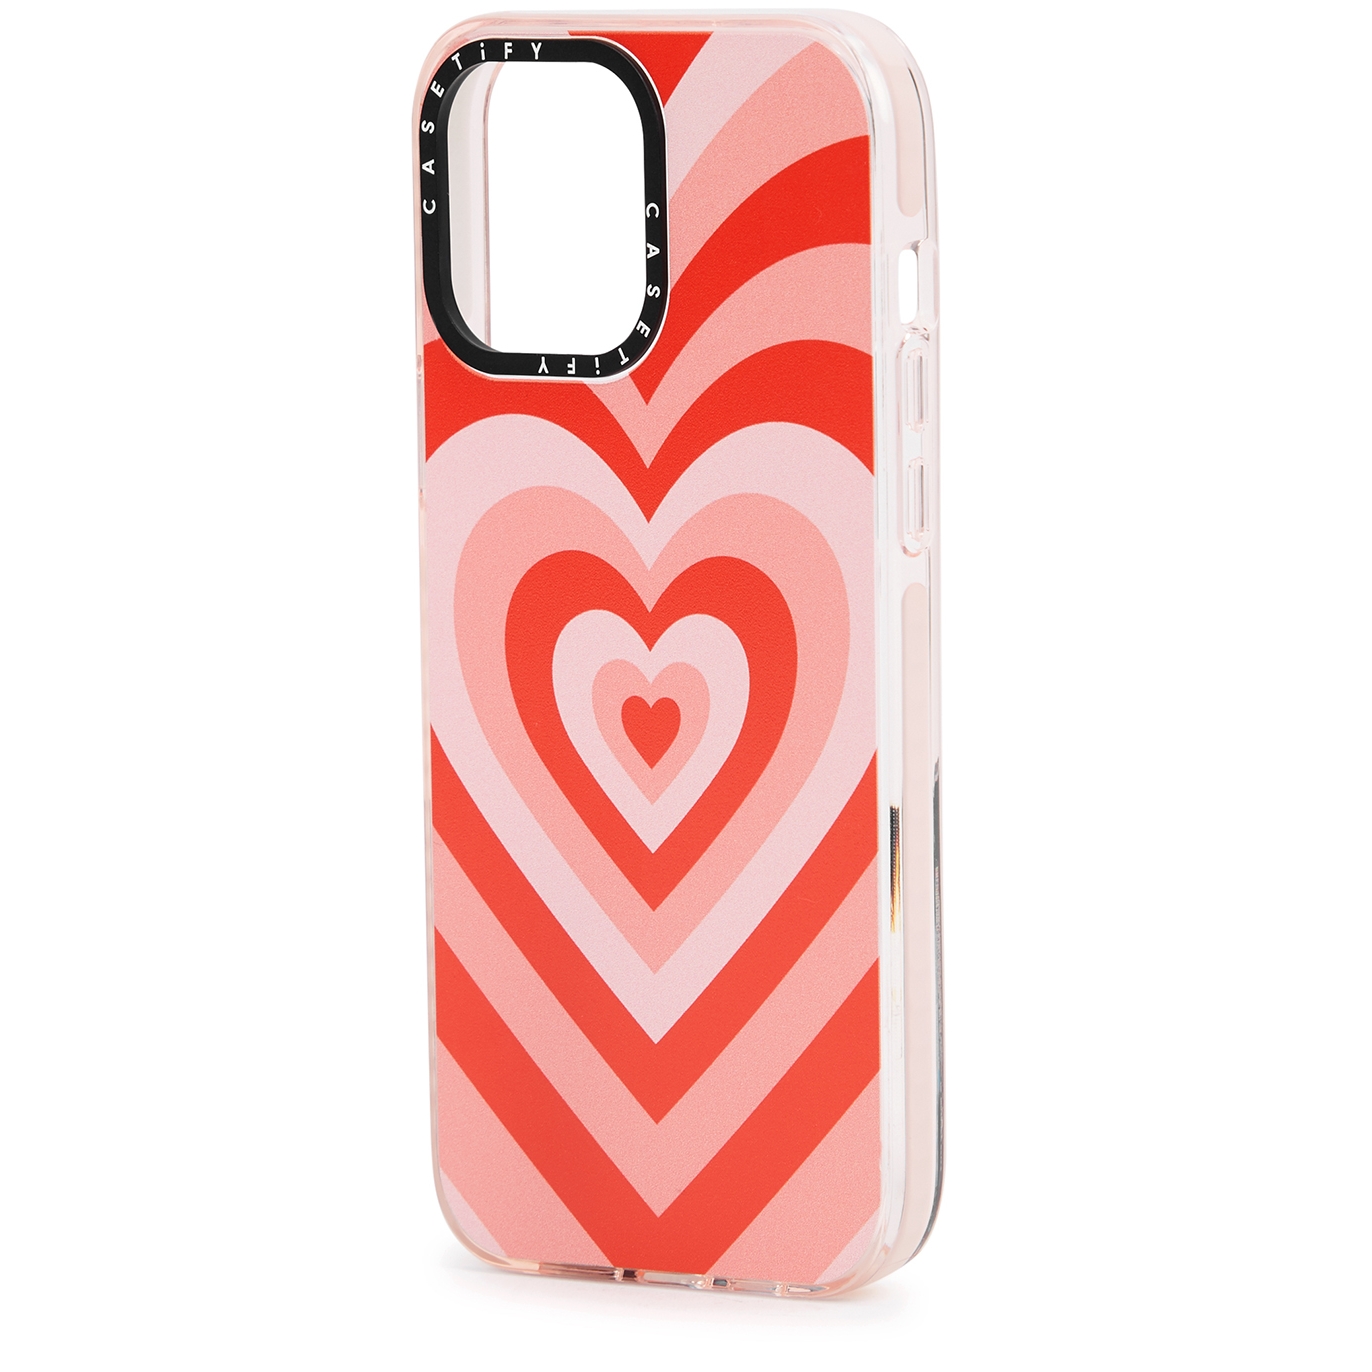 CASETiFY 70s Pink Heart IPhone 13 Pro Max Case - RED